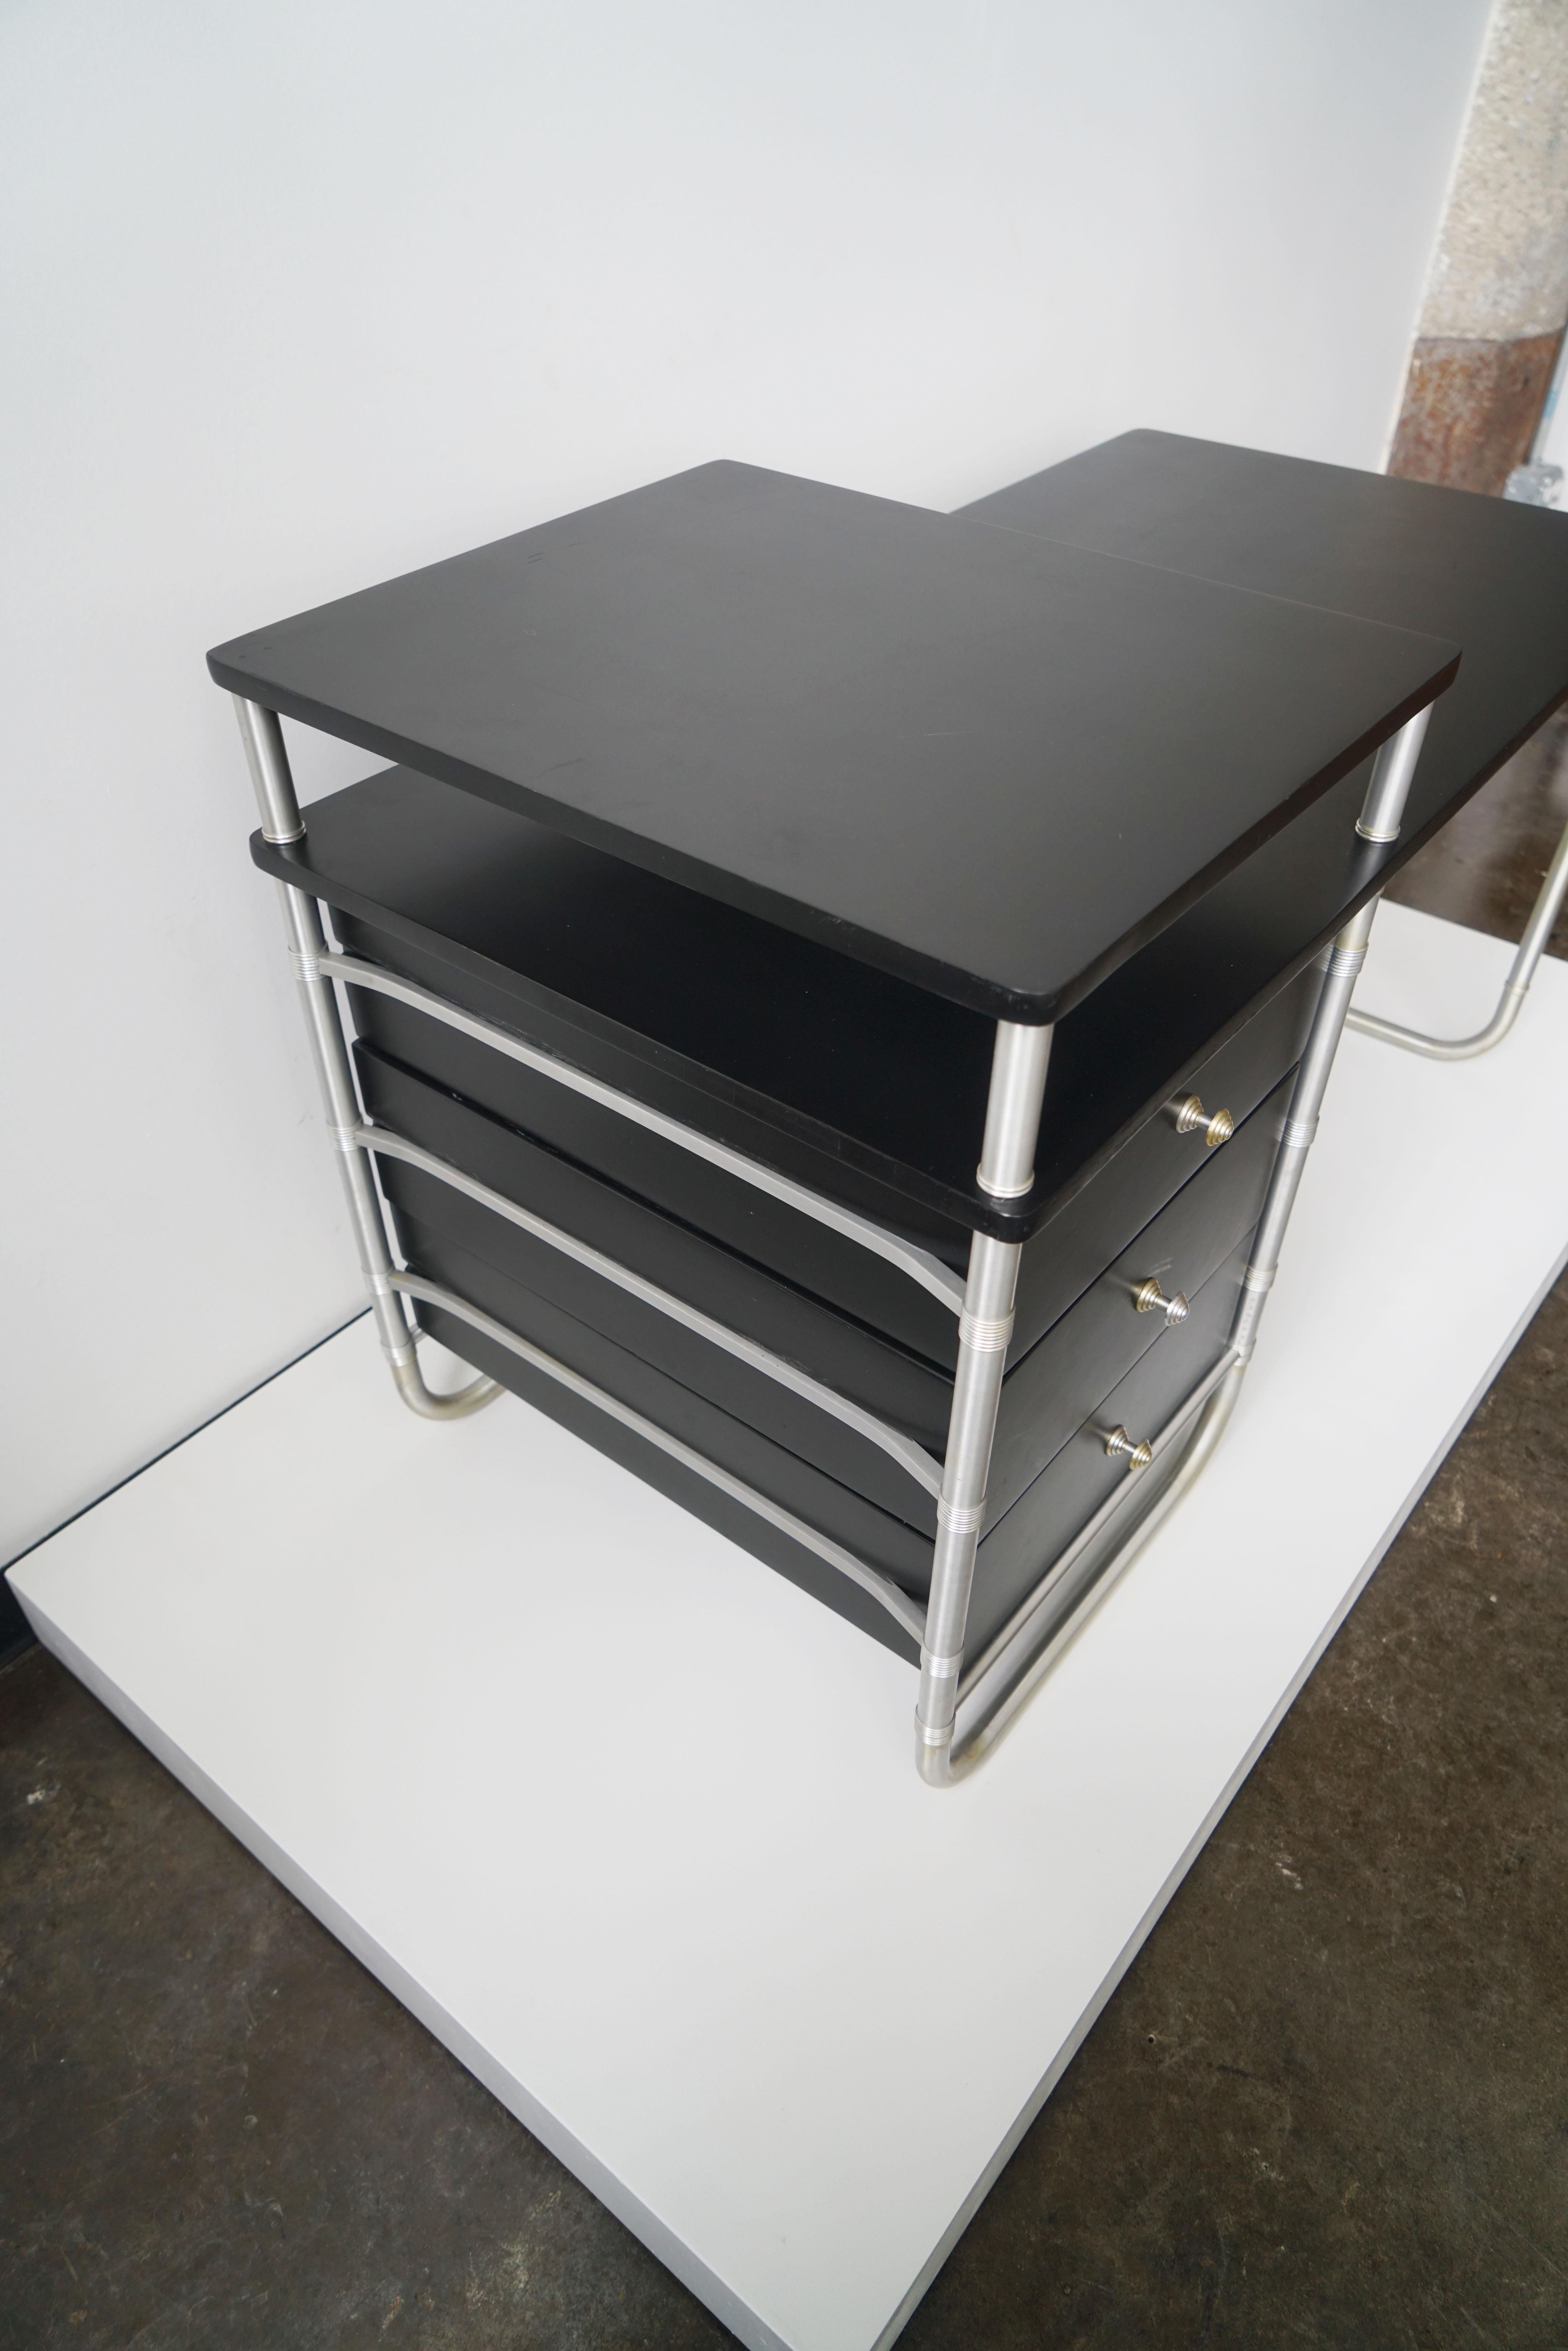 Rare Warren McArthur Two-Tier Desk with Drawers, Reversible, Machine Age 1930s For Sale 5